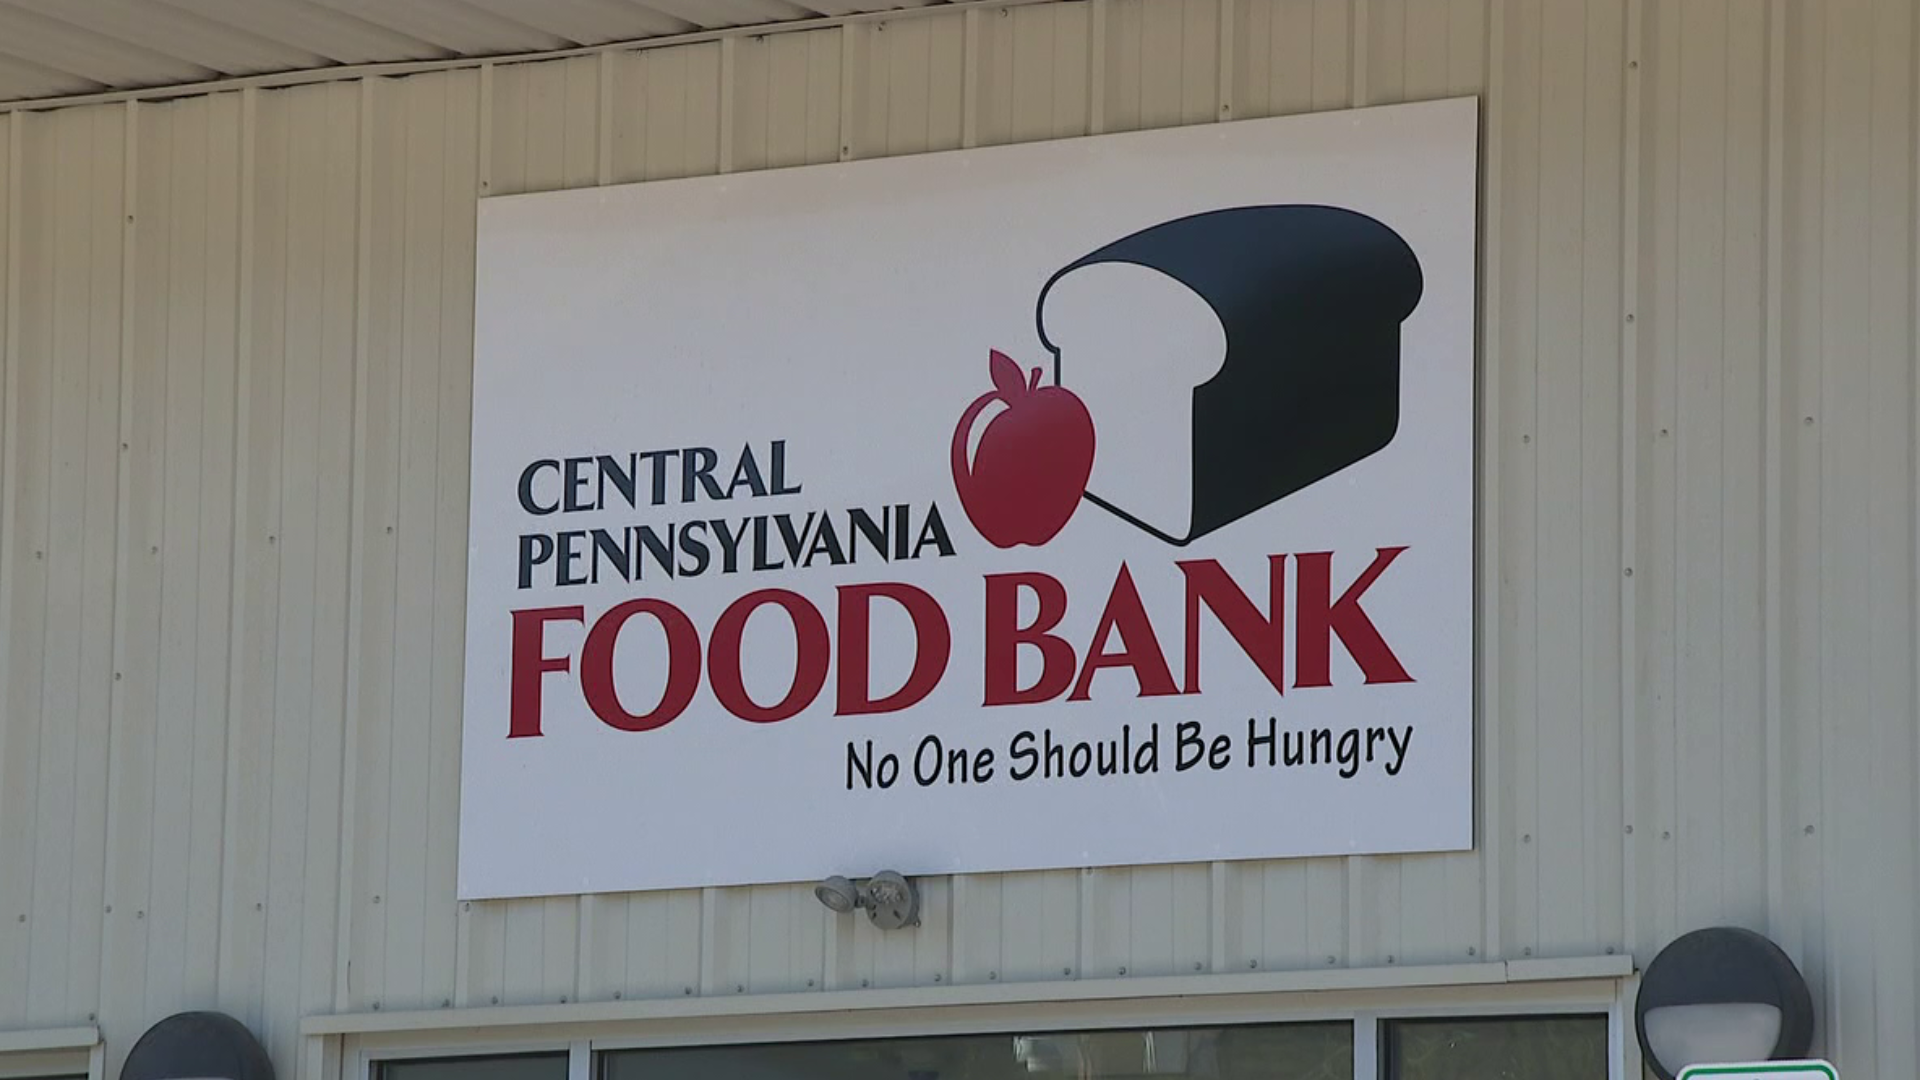 The AllOne Foundation donated nearly $400,000 to the Central Pennsylvania Food Bank during the pandemic.